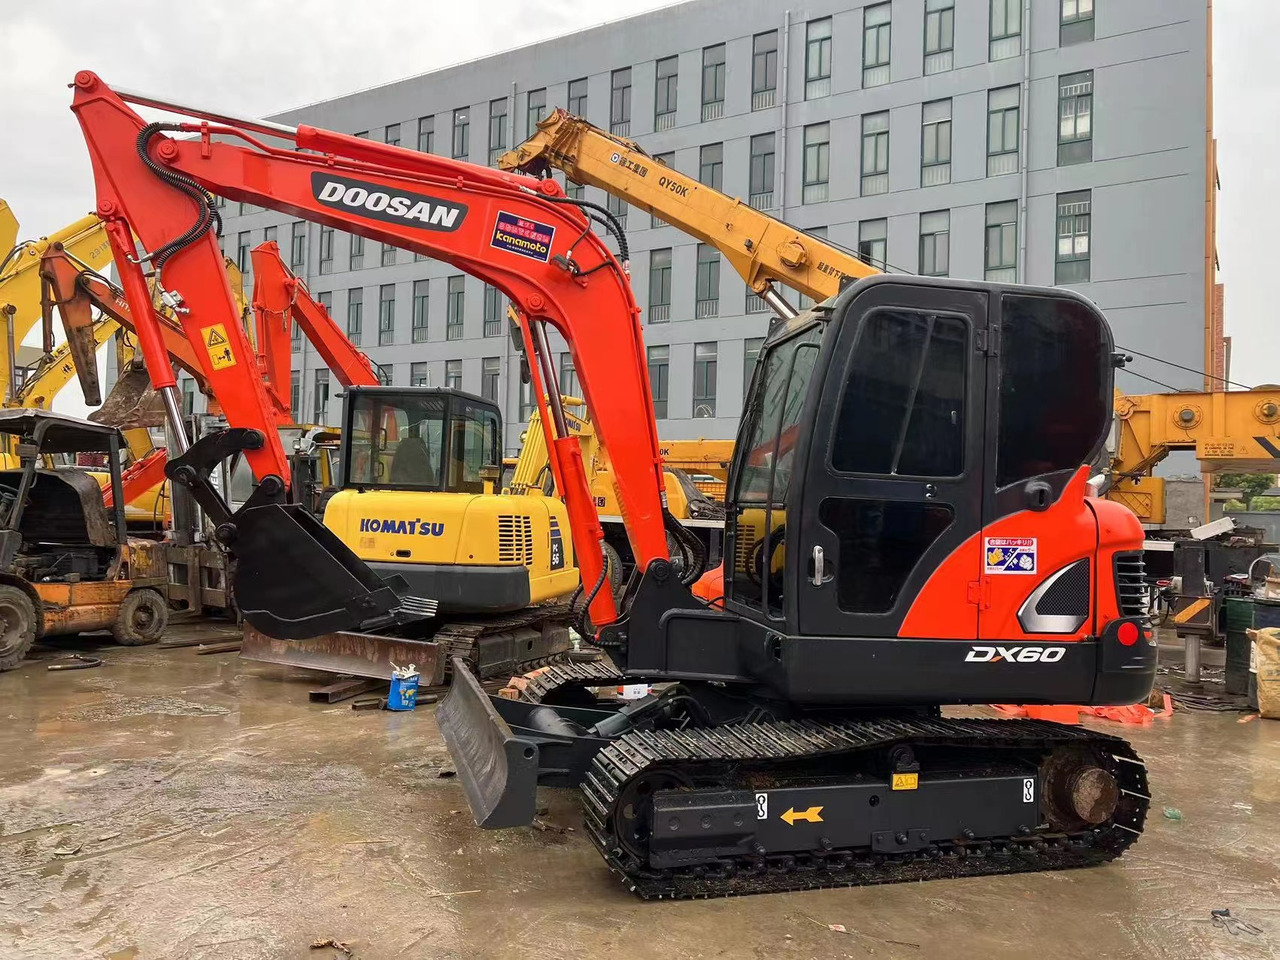 Pelle sur chenille High quality DOOSAN used excavator DX60 strong power hot selling !!!: photos 5